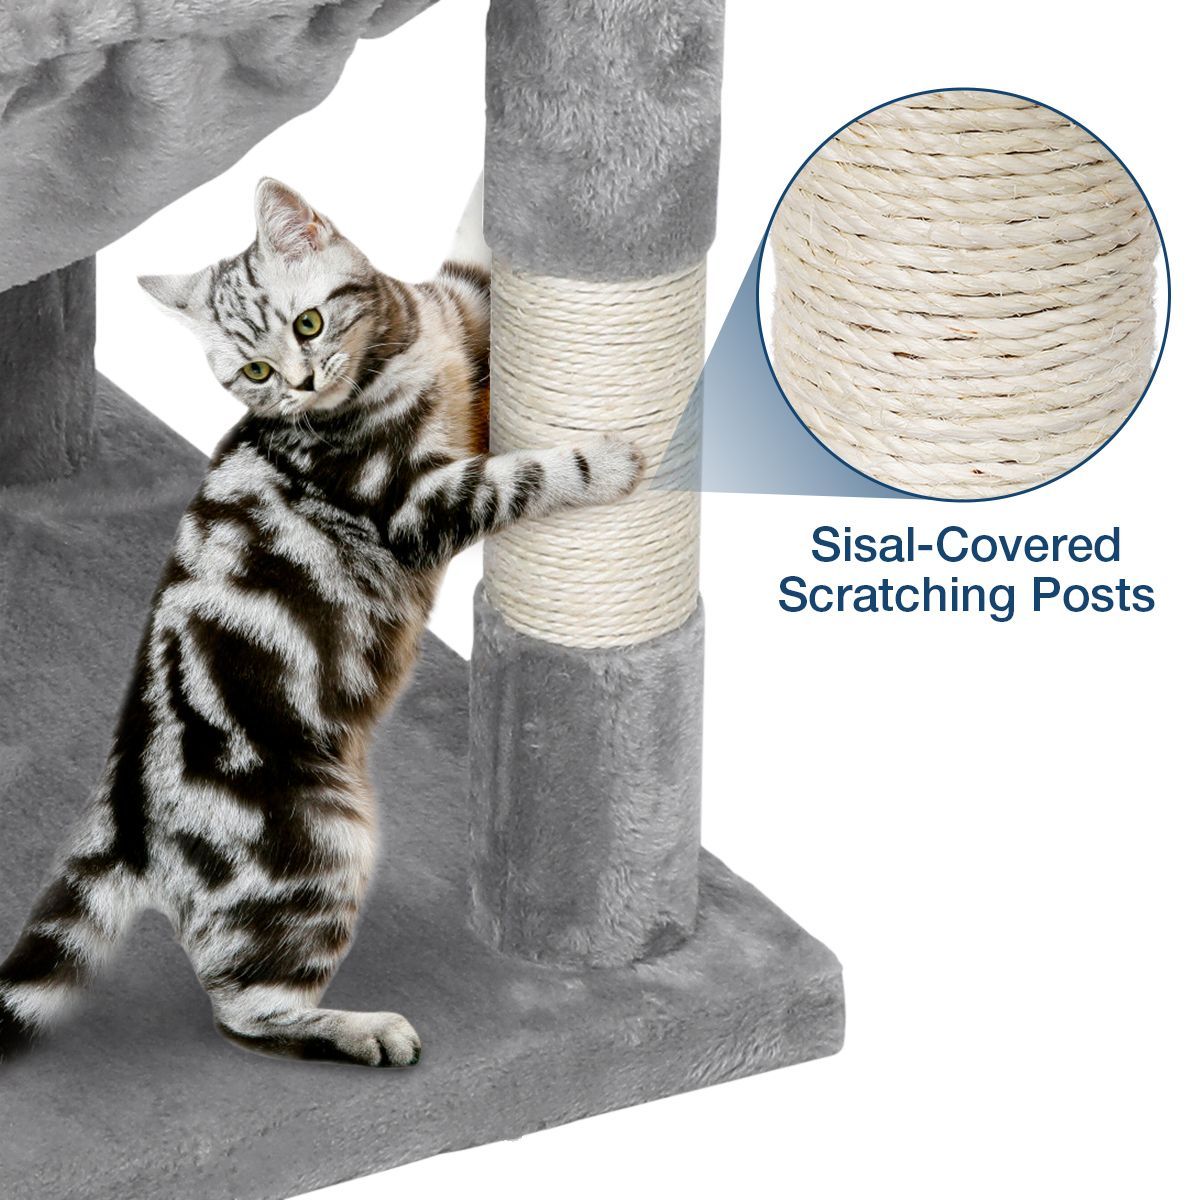 Domestic-Delivery-Big-Cat-Tree-Tower-Condo-Furniture-Scratch-Post-Cat-Jumping-Toys-for-Kittens-Pet-H-1589433